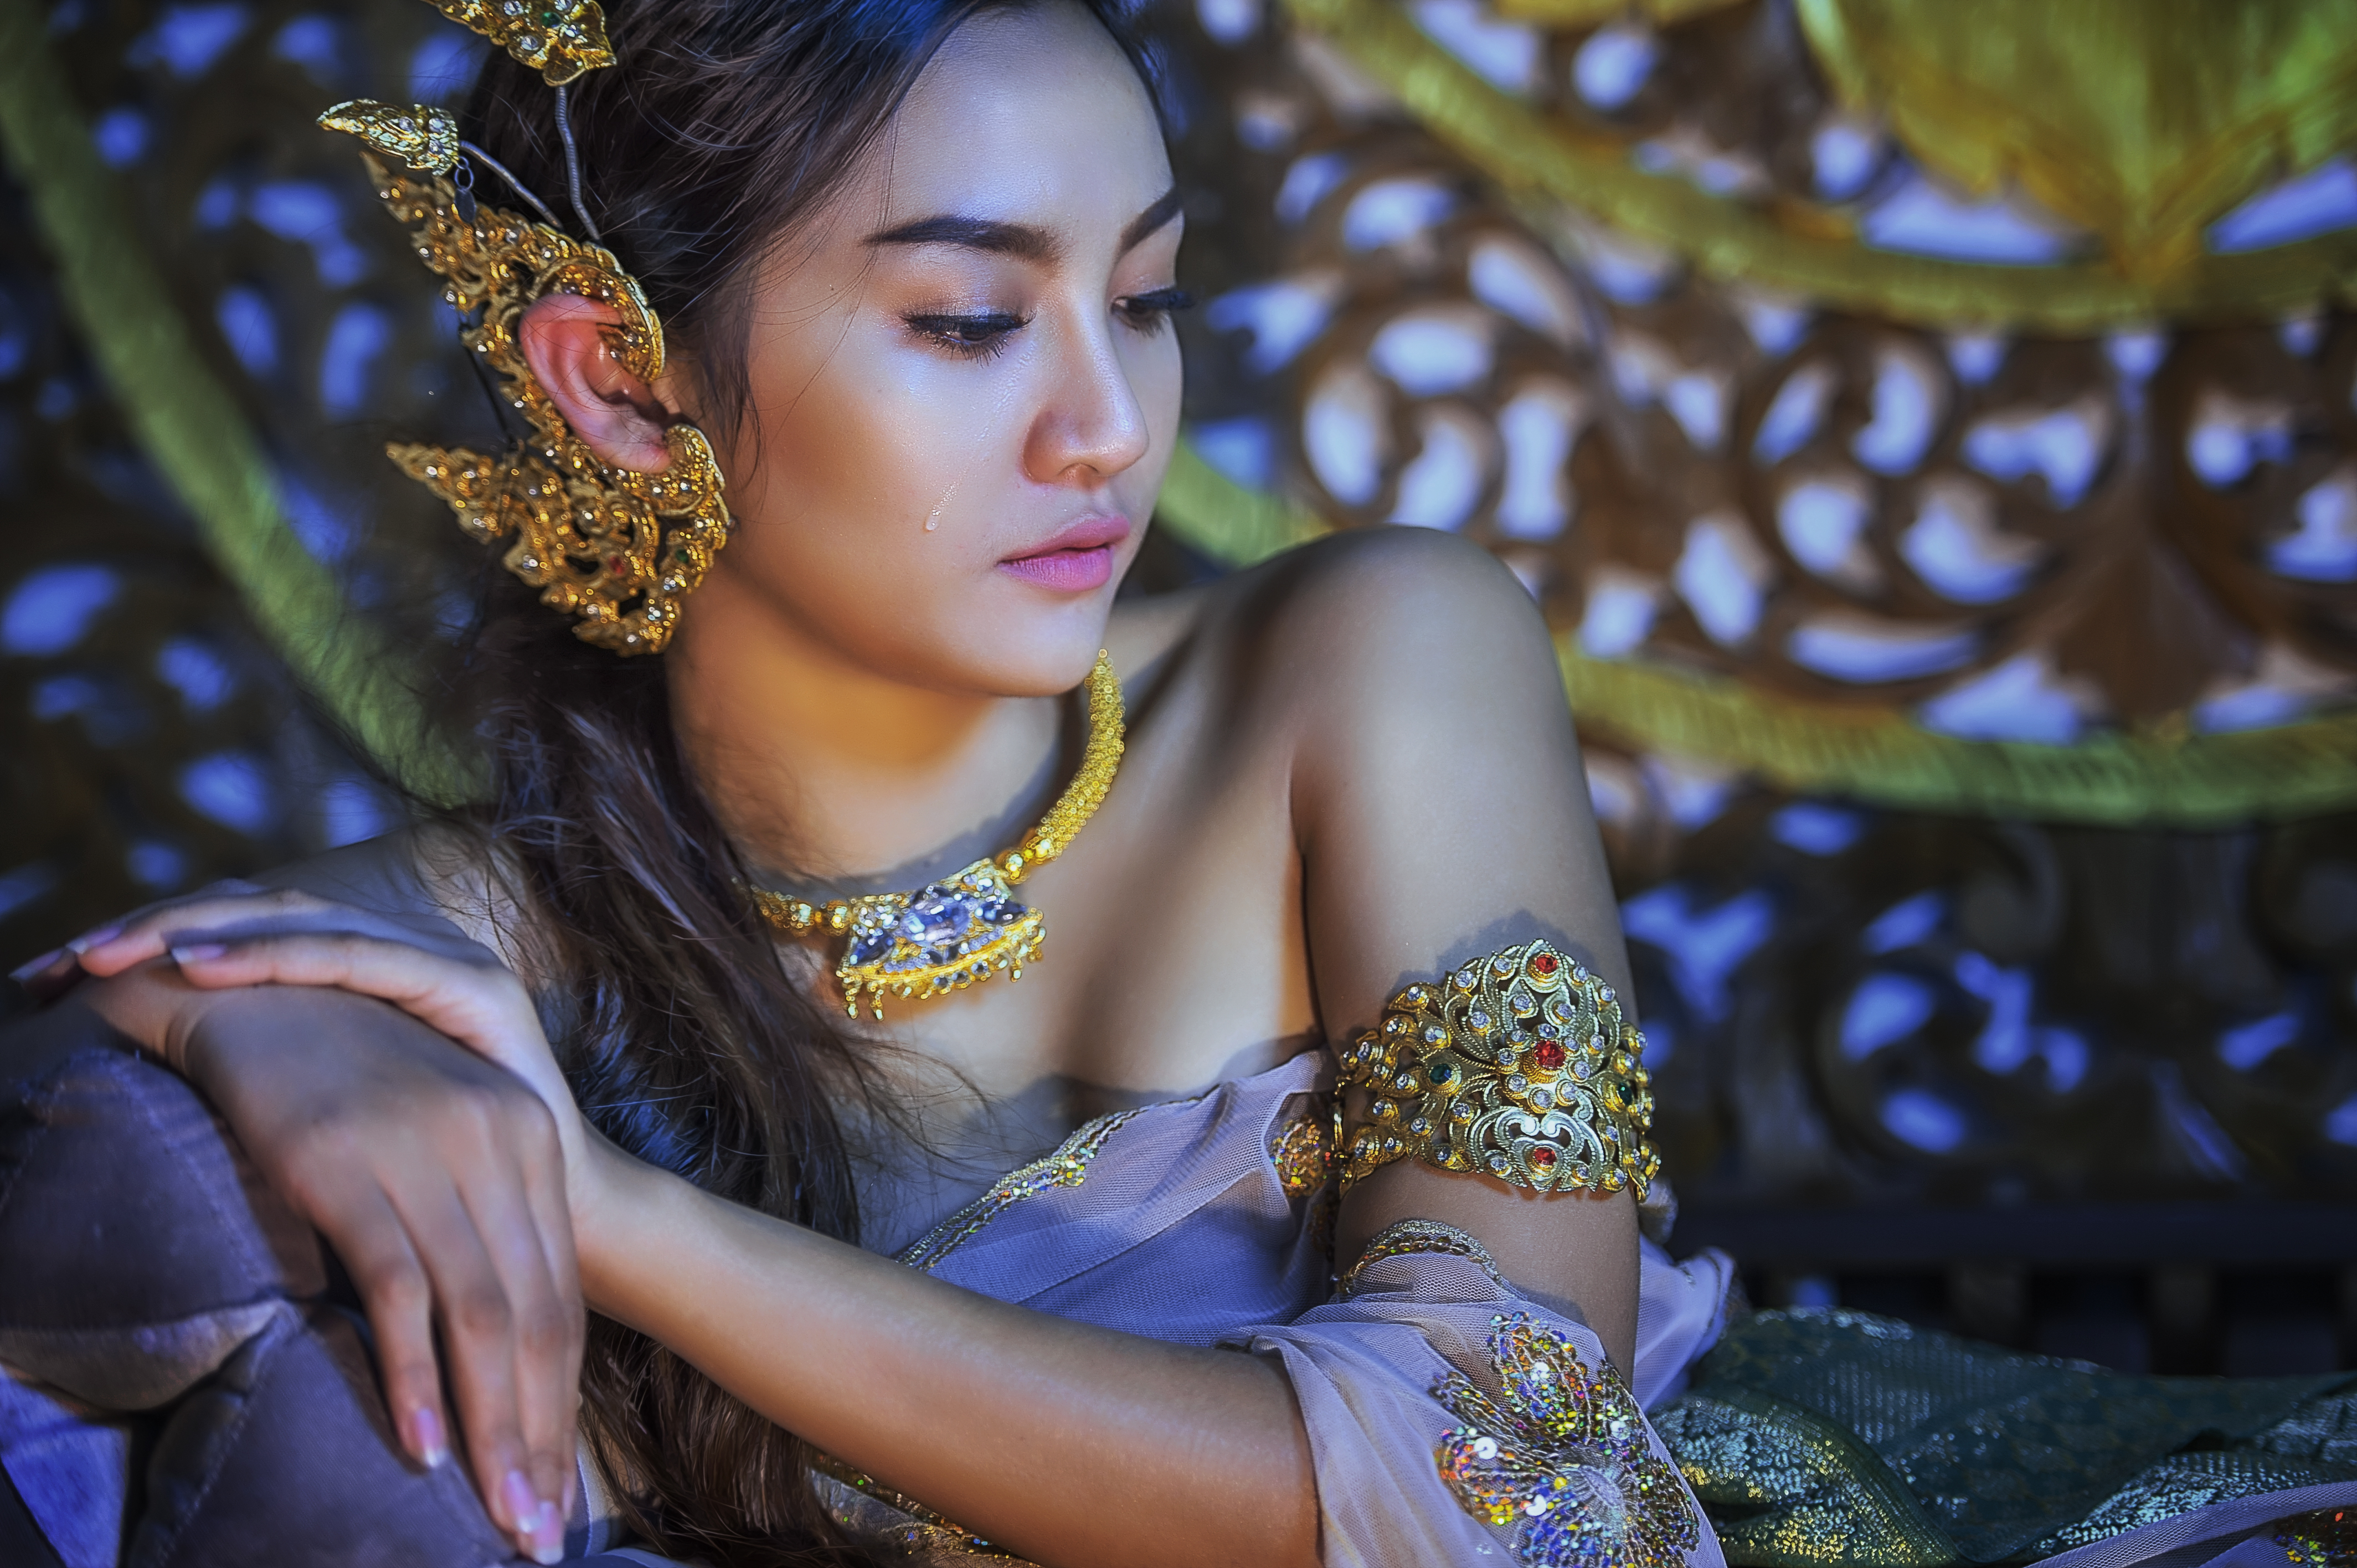 Bokeh Dress Earrings Girl Jewelry Model Necklace Thai Thailand Traditional Costume Woman 4256x2832